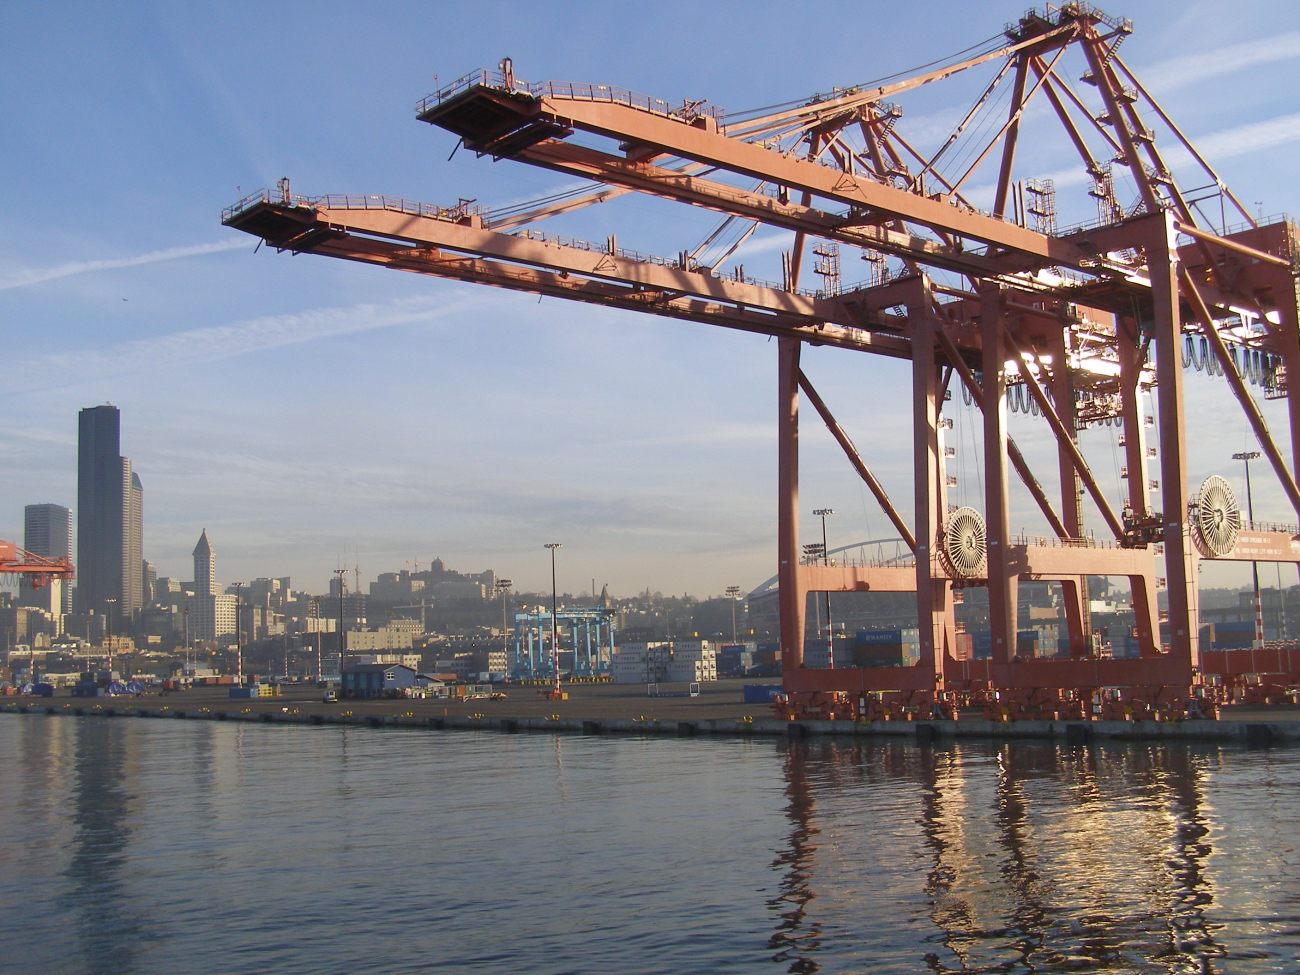 The container docks on the Seattle waterfront